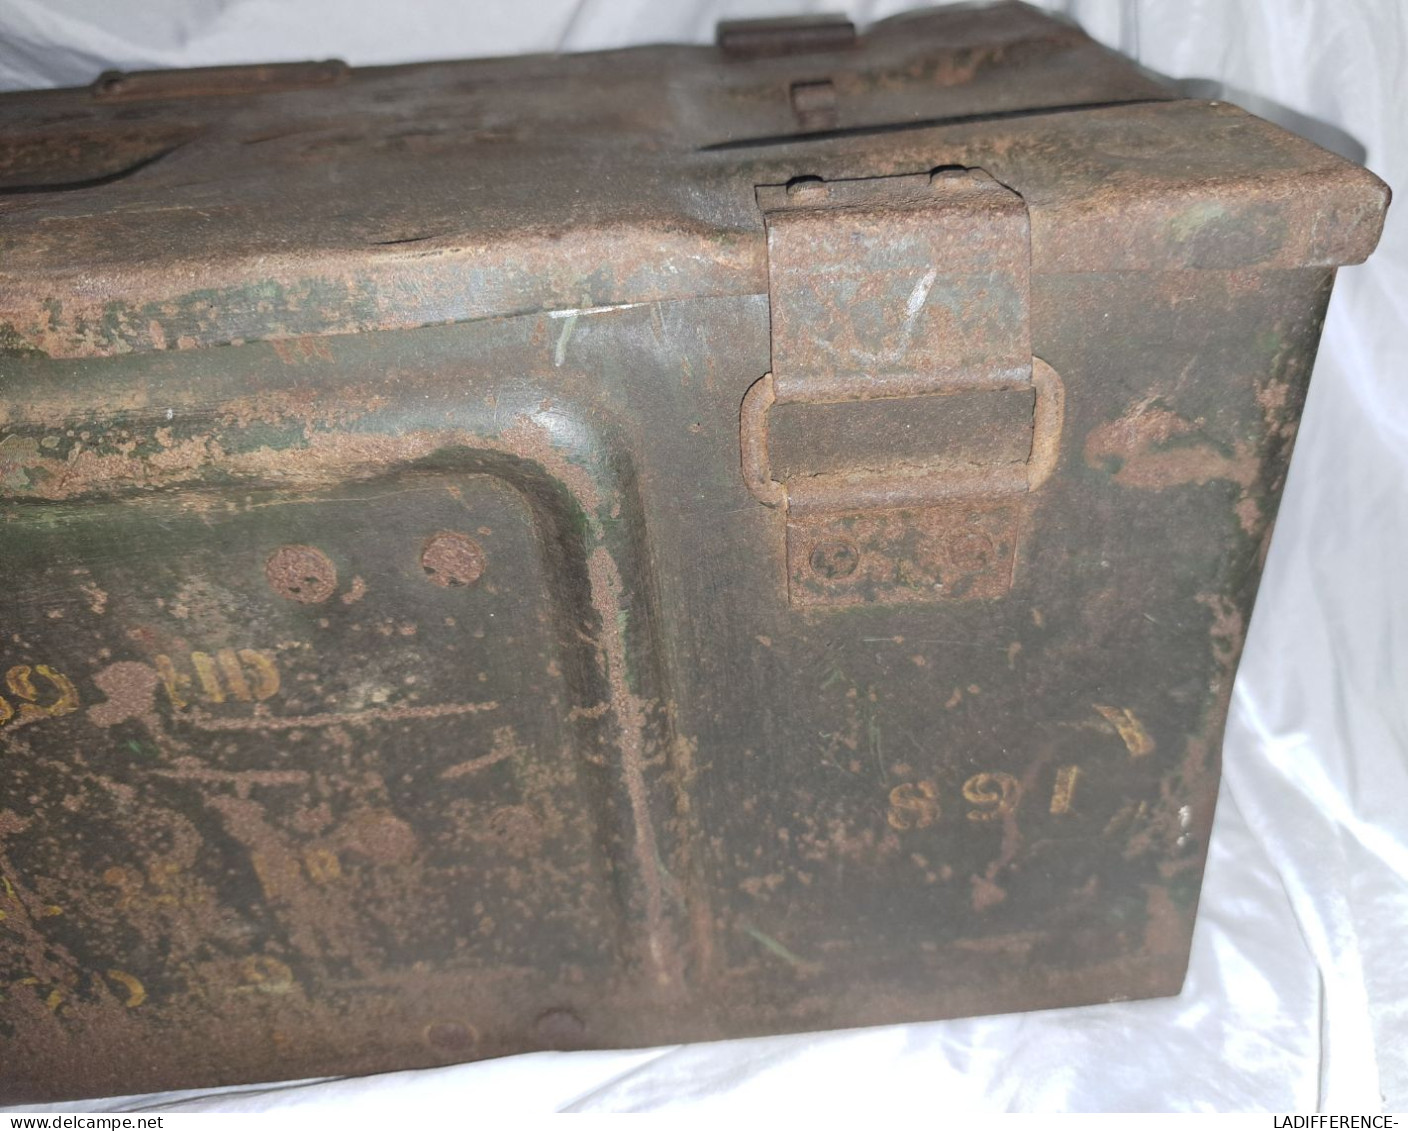 Caisse anglaise pour 25 PDR 1941 WW2